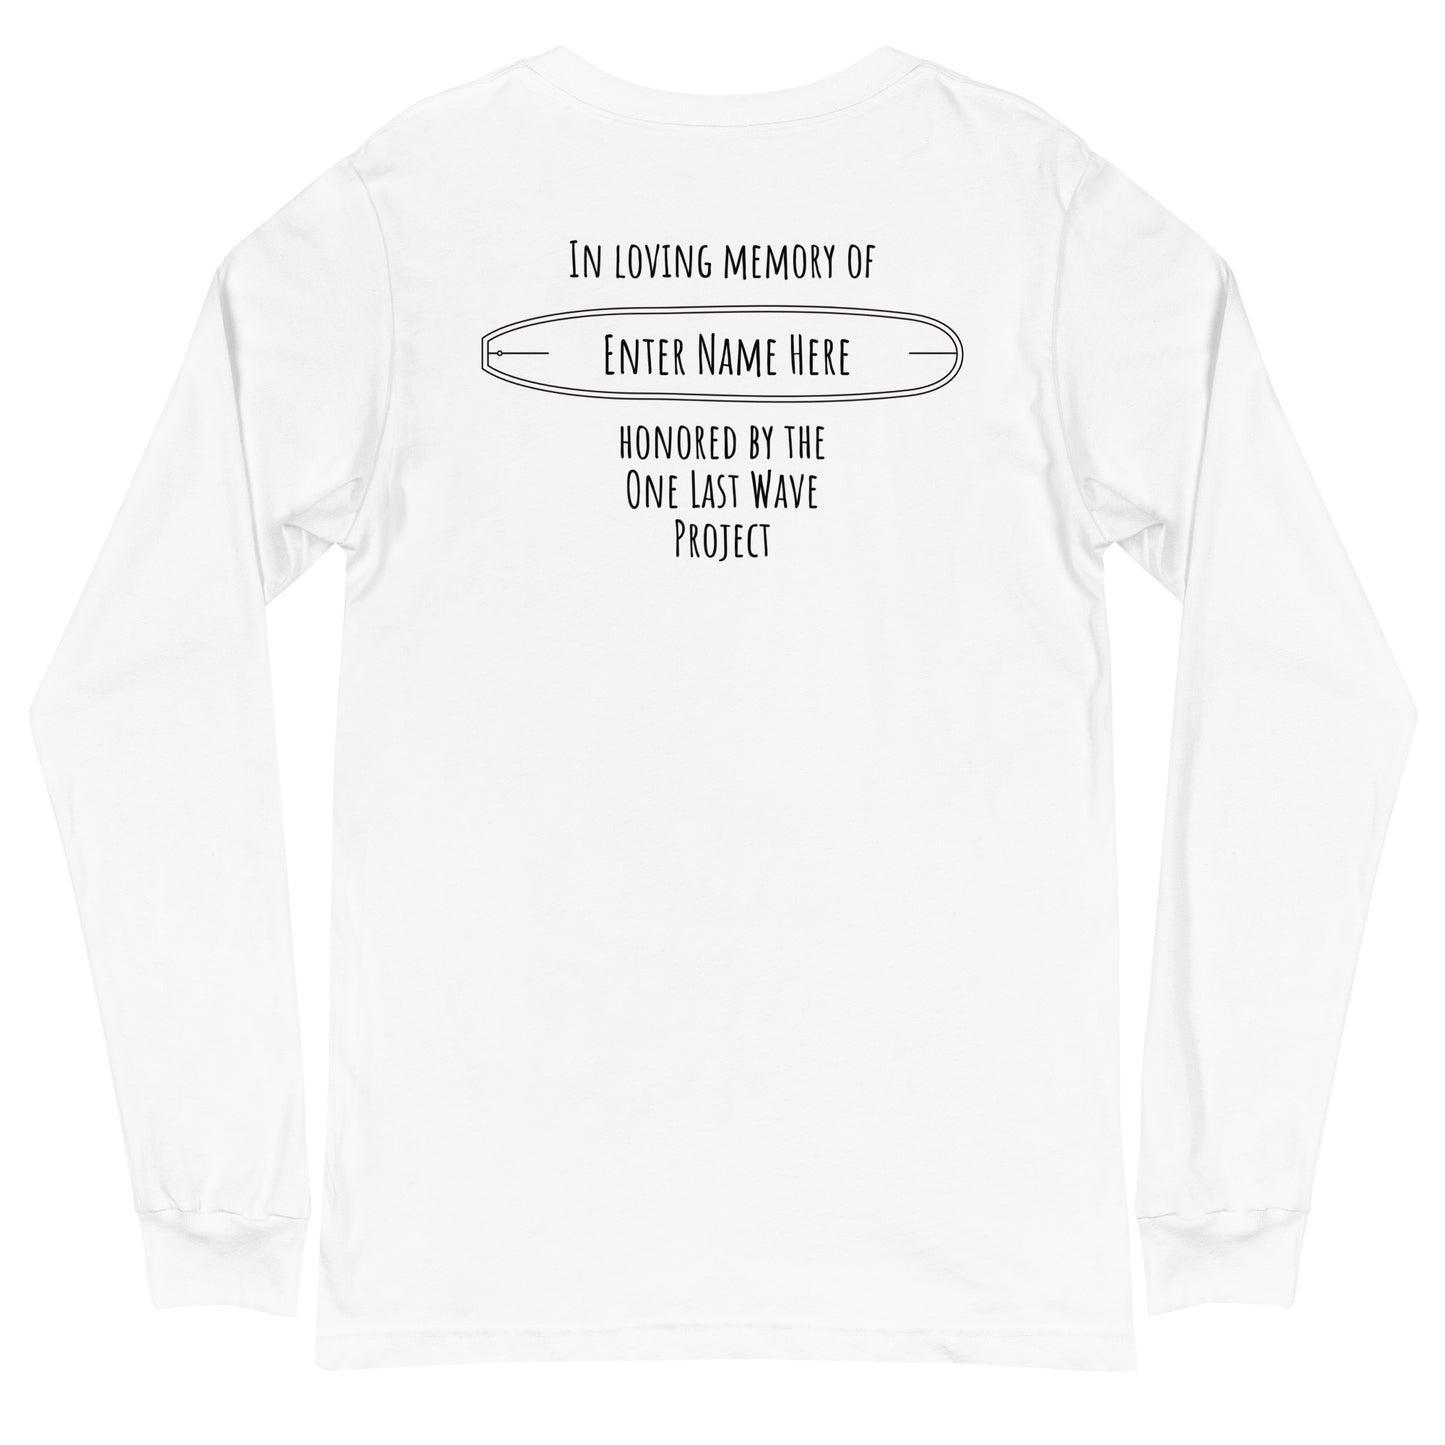 OLWP - Long Sleeve - Personalized